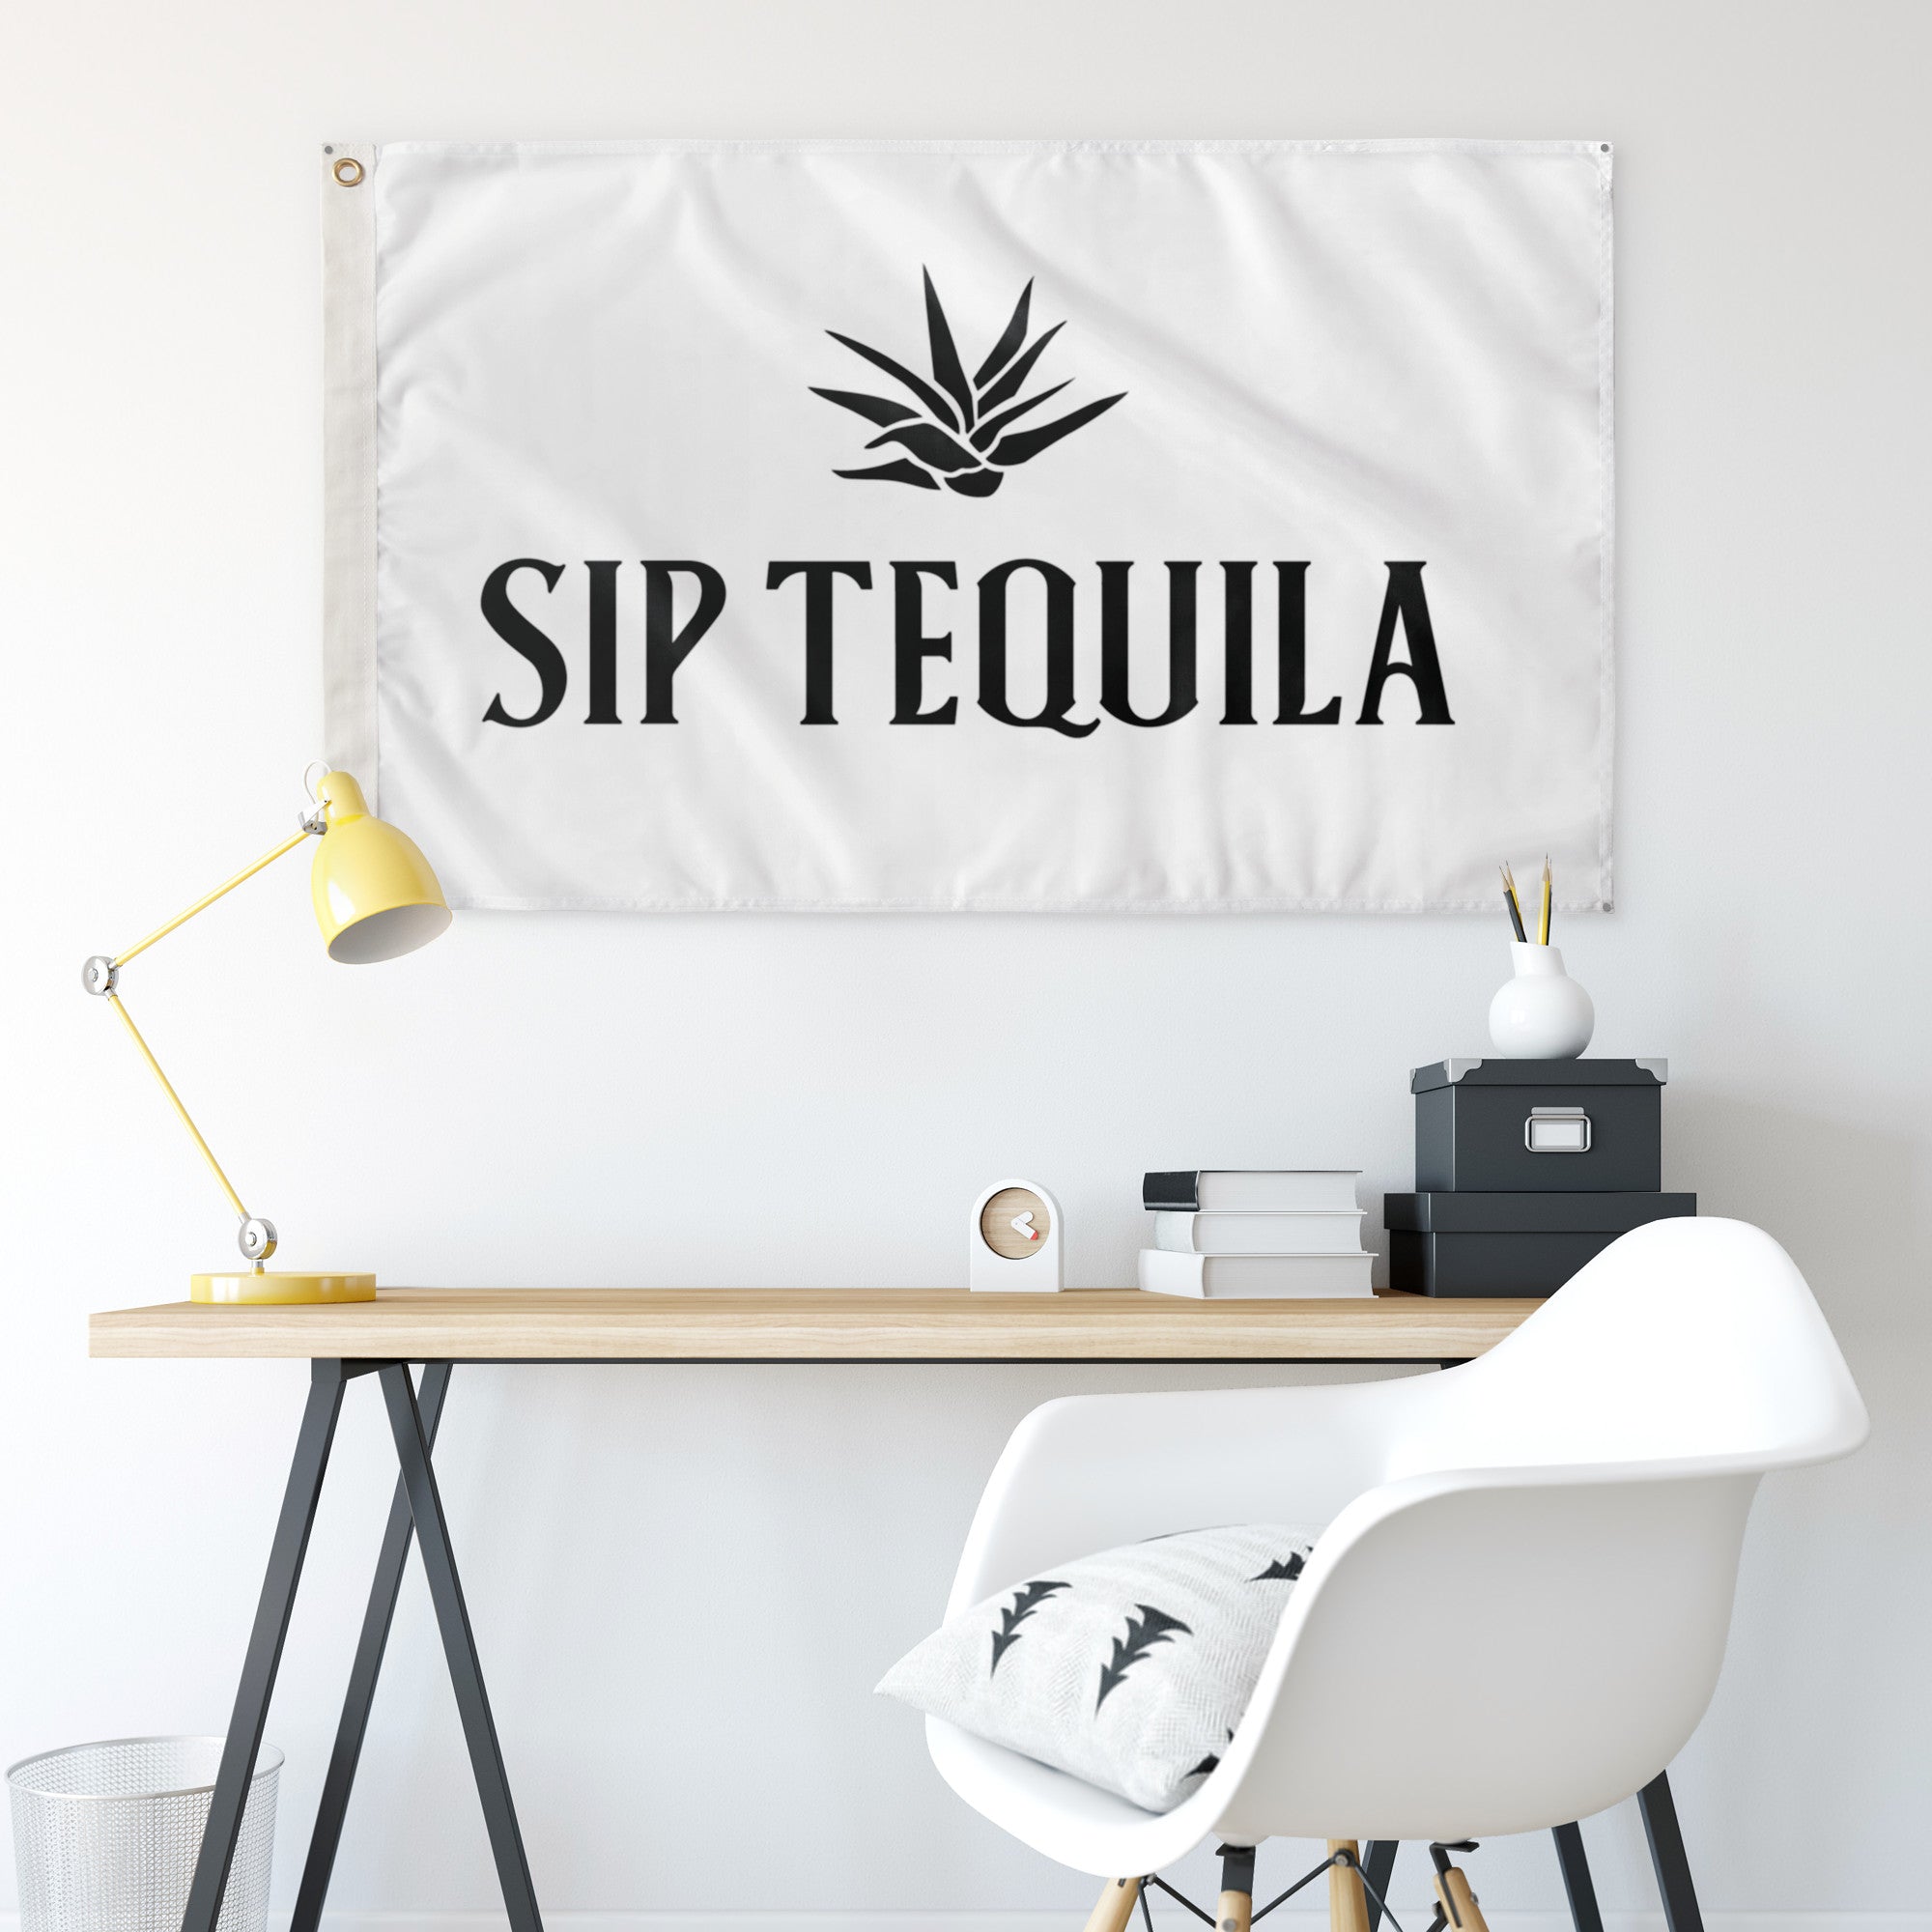 Sip Tequila Flag